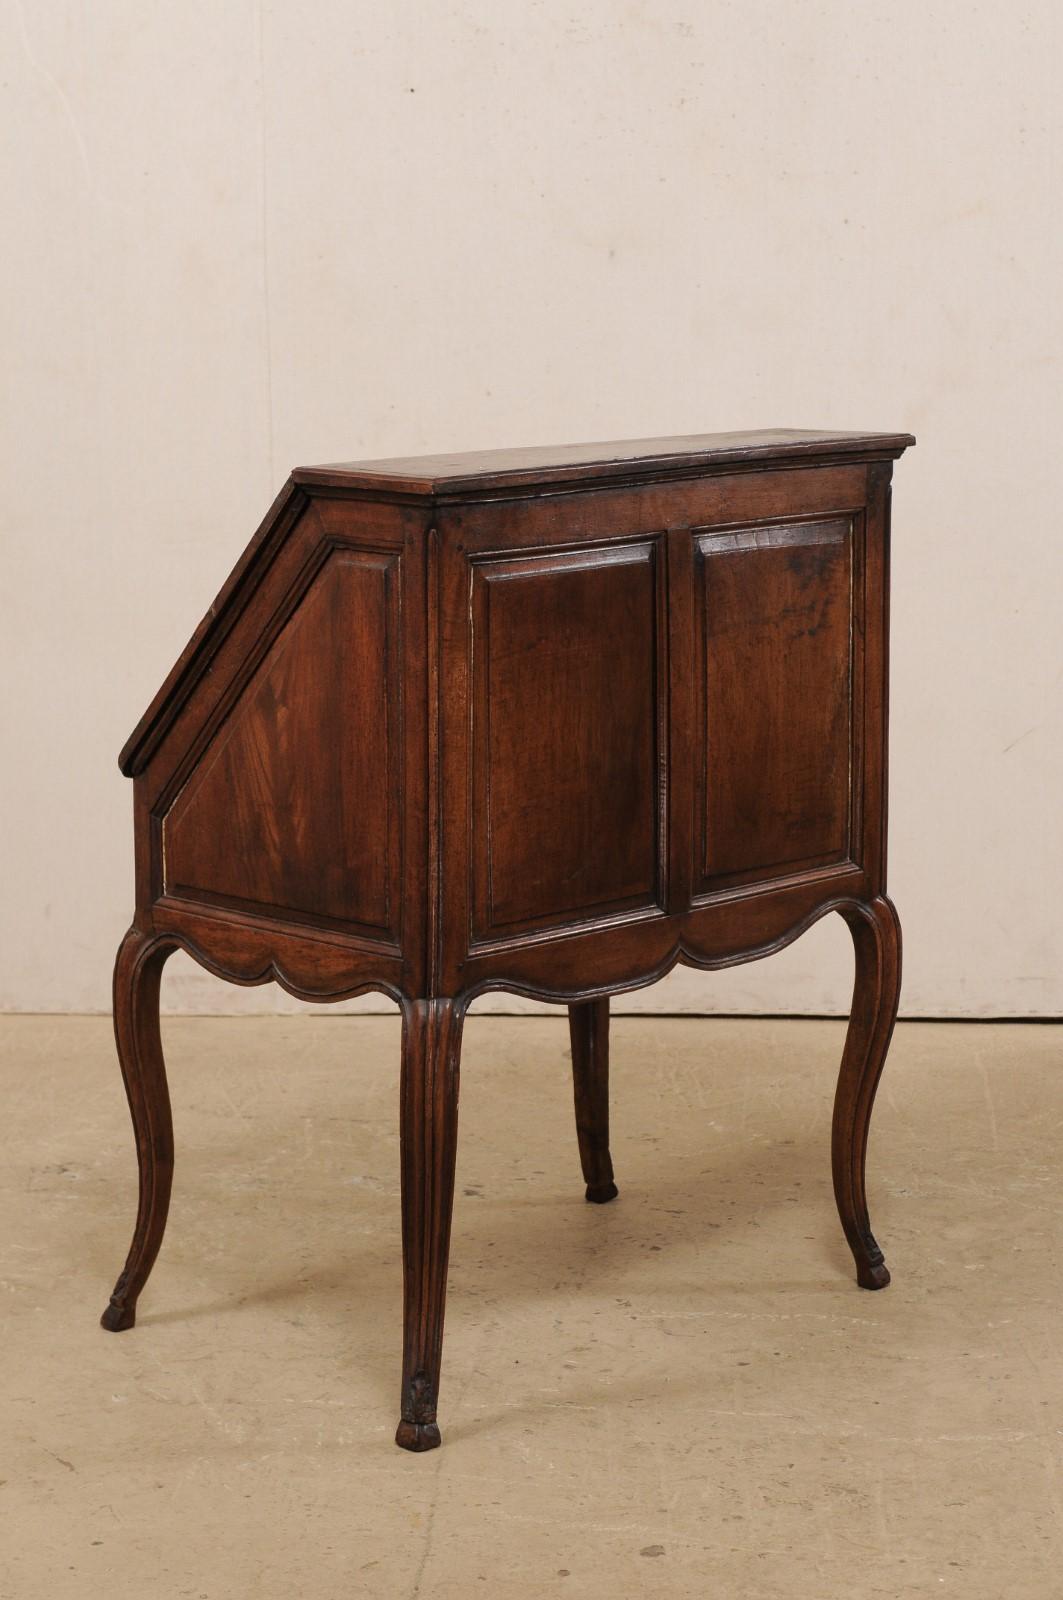 Elegant French Louis XV Period Secretary Writing Desk with Hidden Compartment For Sale 3